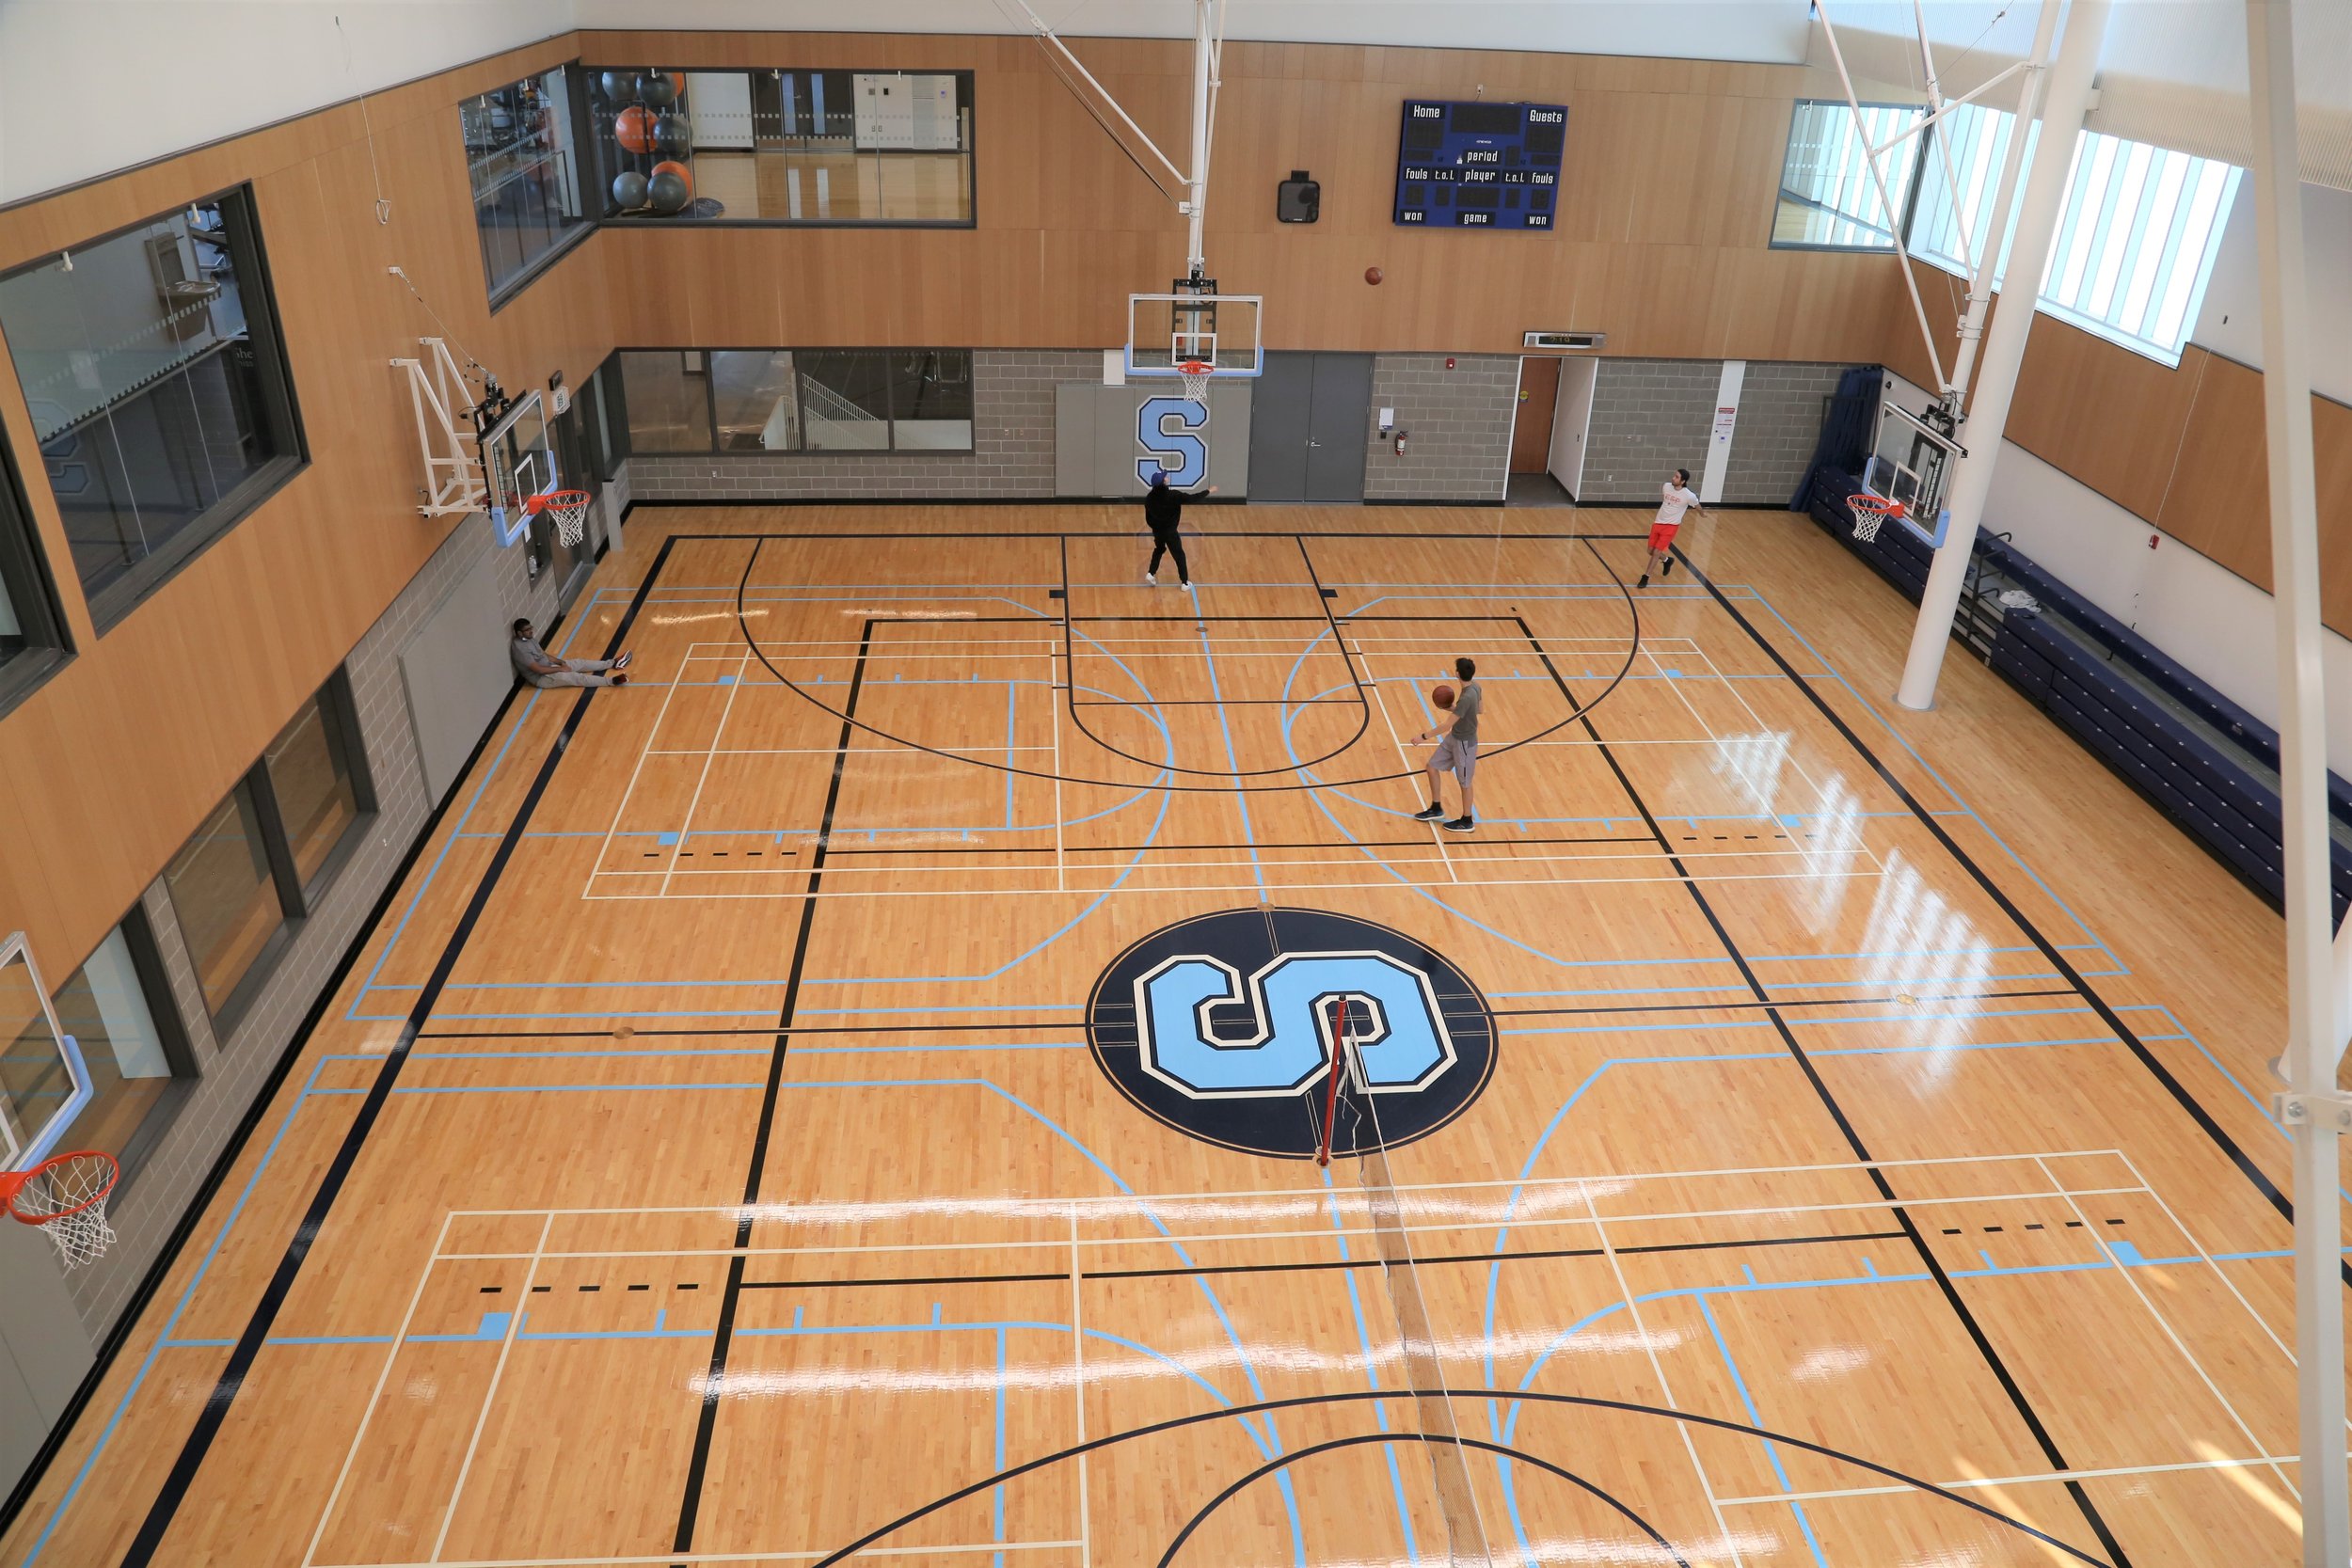  Top view of basketball court and gym at the HMC Student Centre. Sheridan Bruins logo in the centre of the court. 